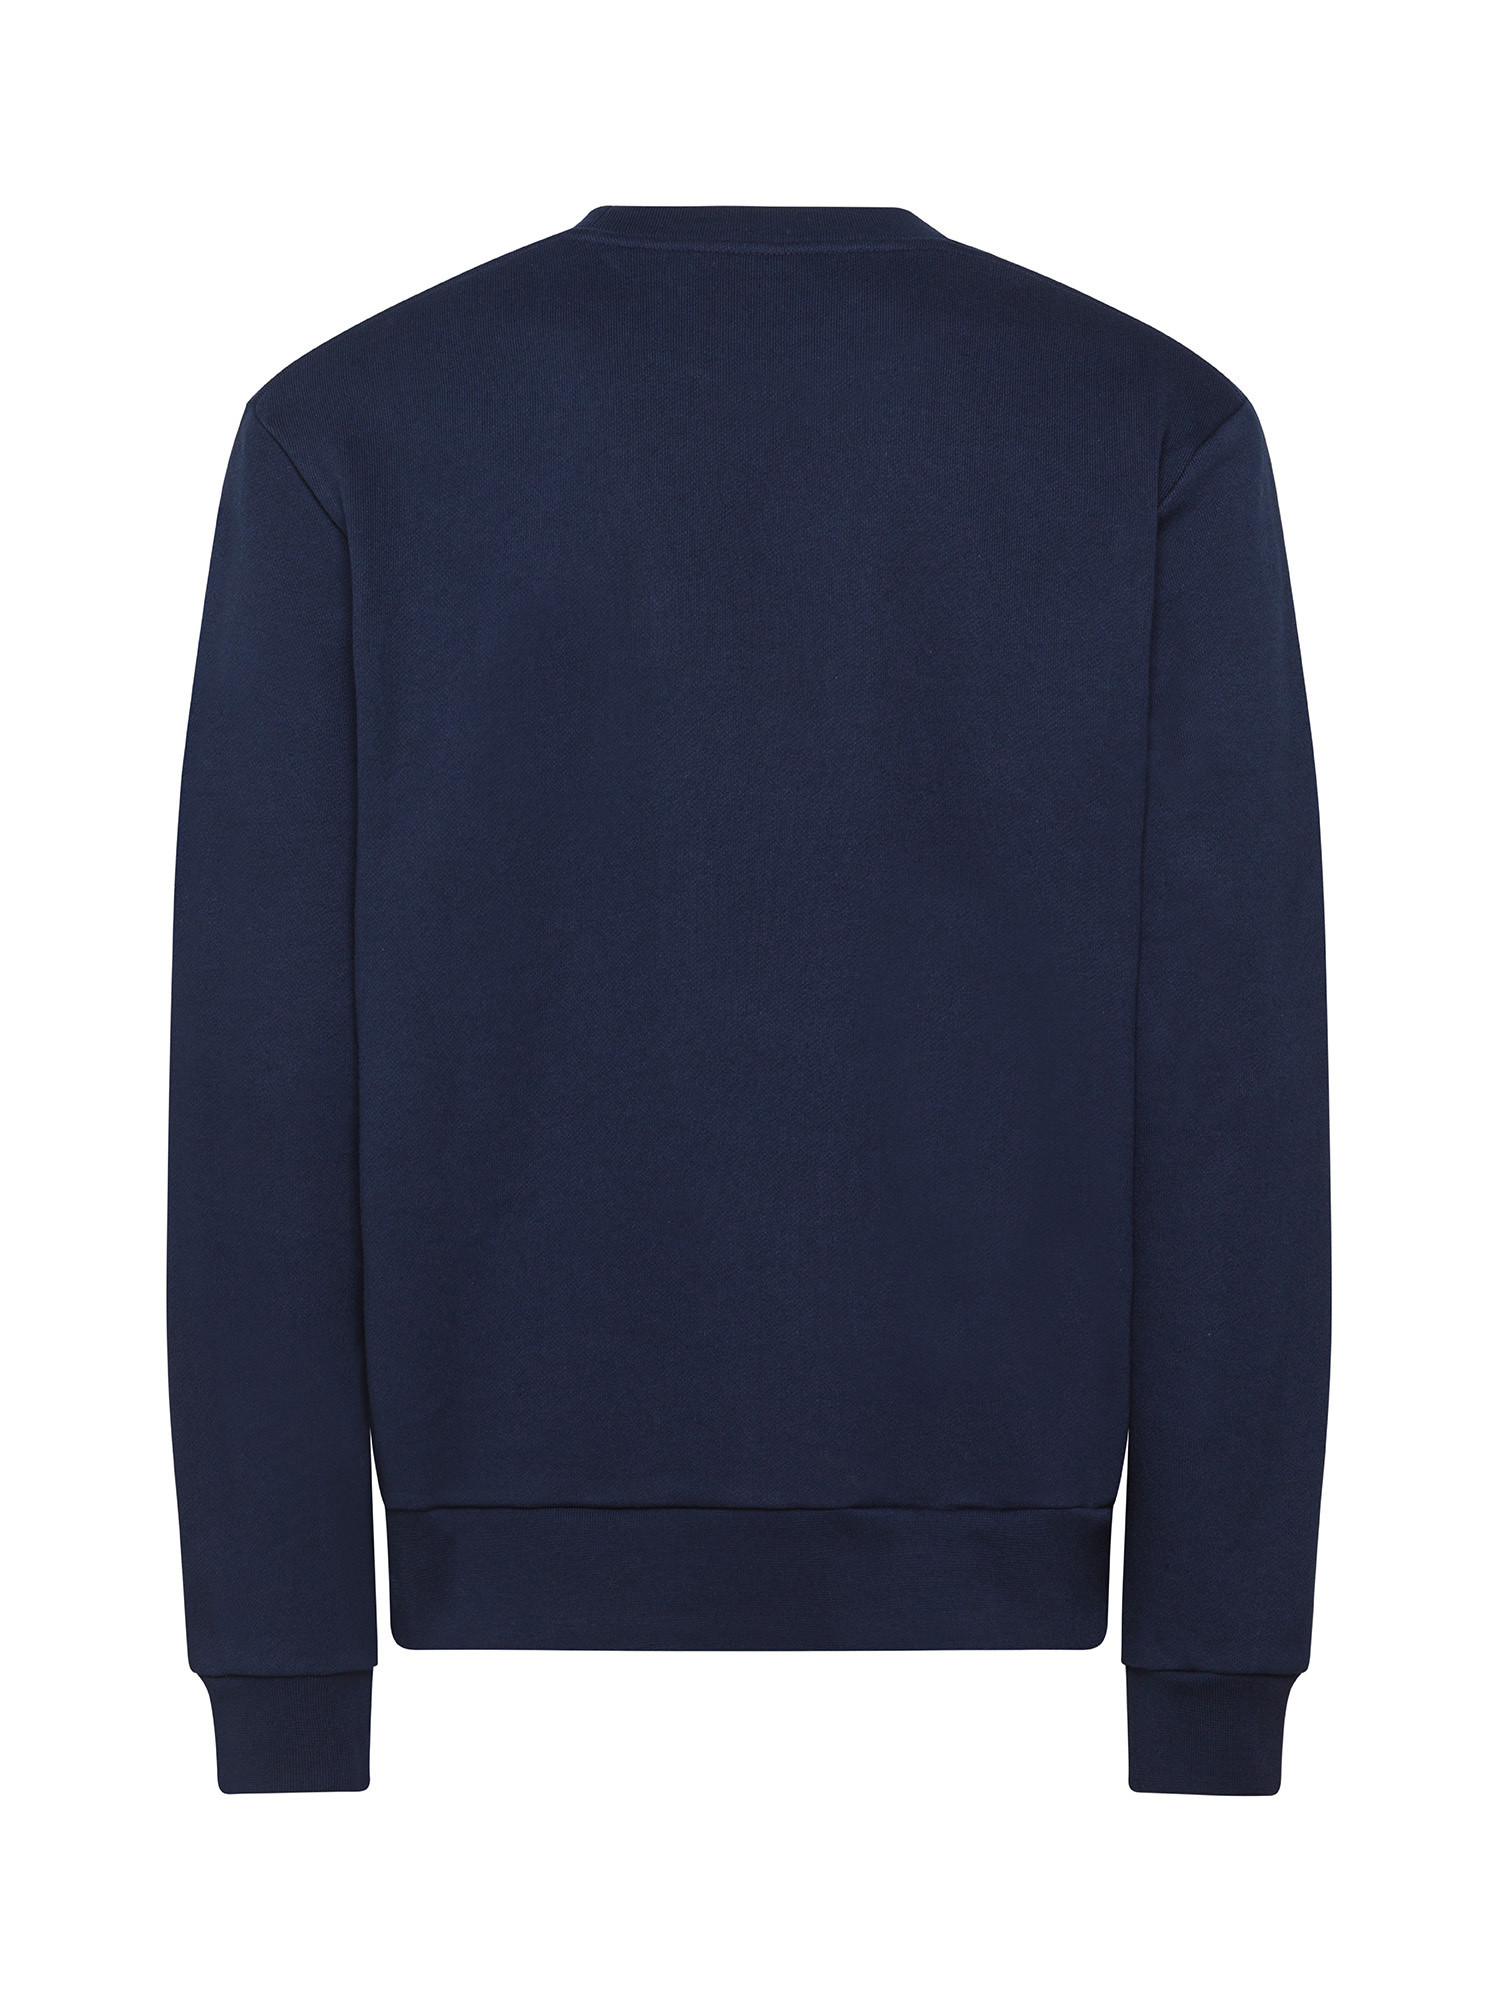 Lacoste - Men's organic cotton sweatshirt with Holiday crest, Blue, large image number 1